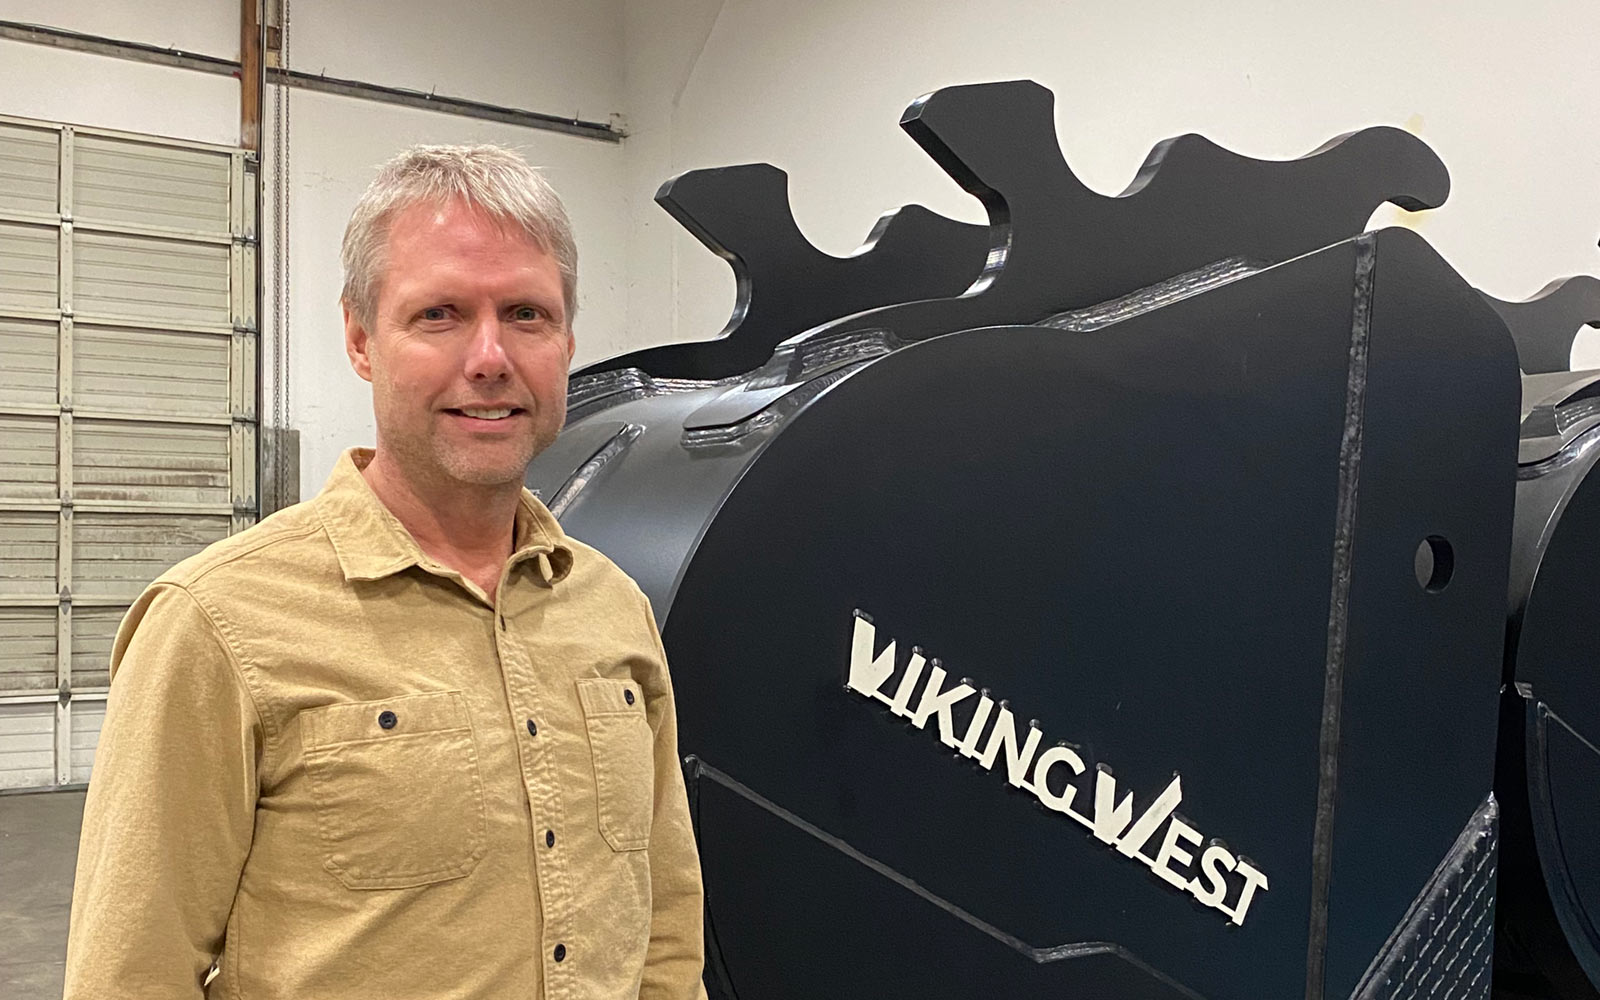 Viking West Announces New Location in Eastern Canada